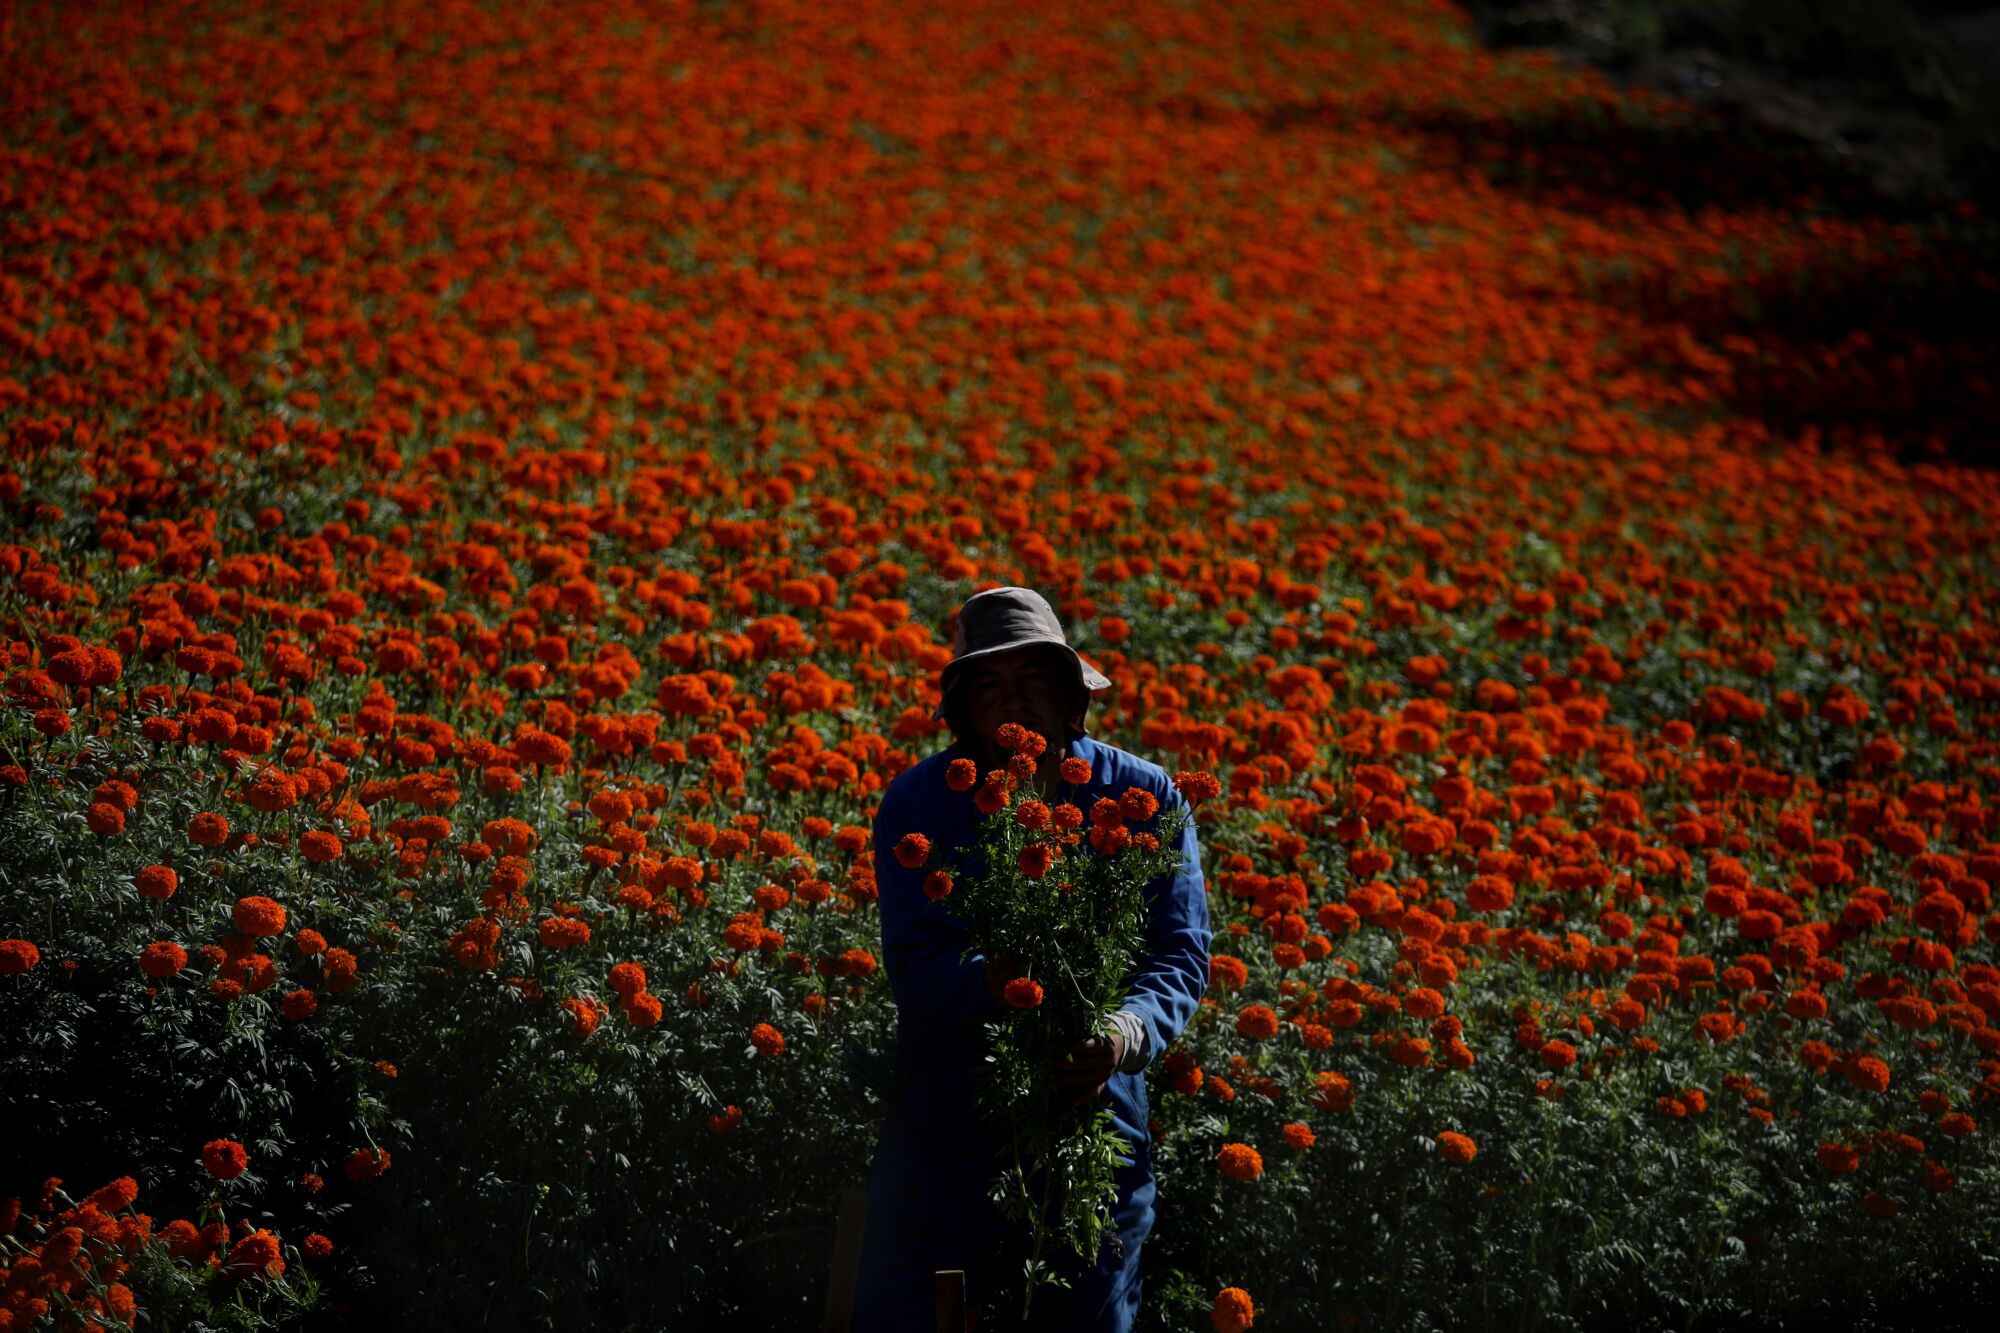 A man stands amid flowers.